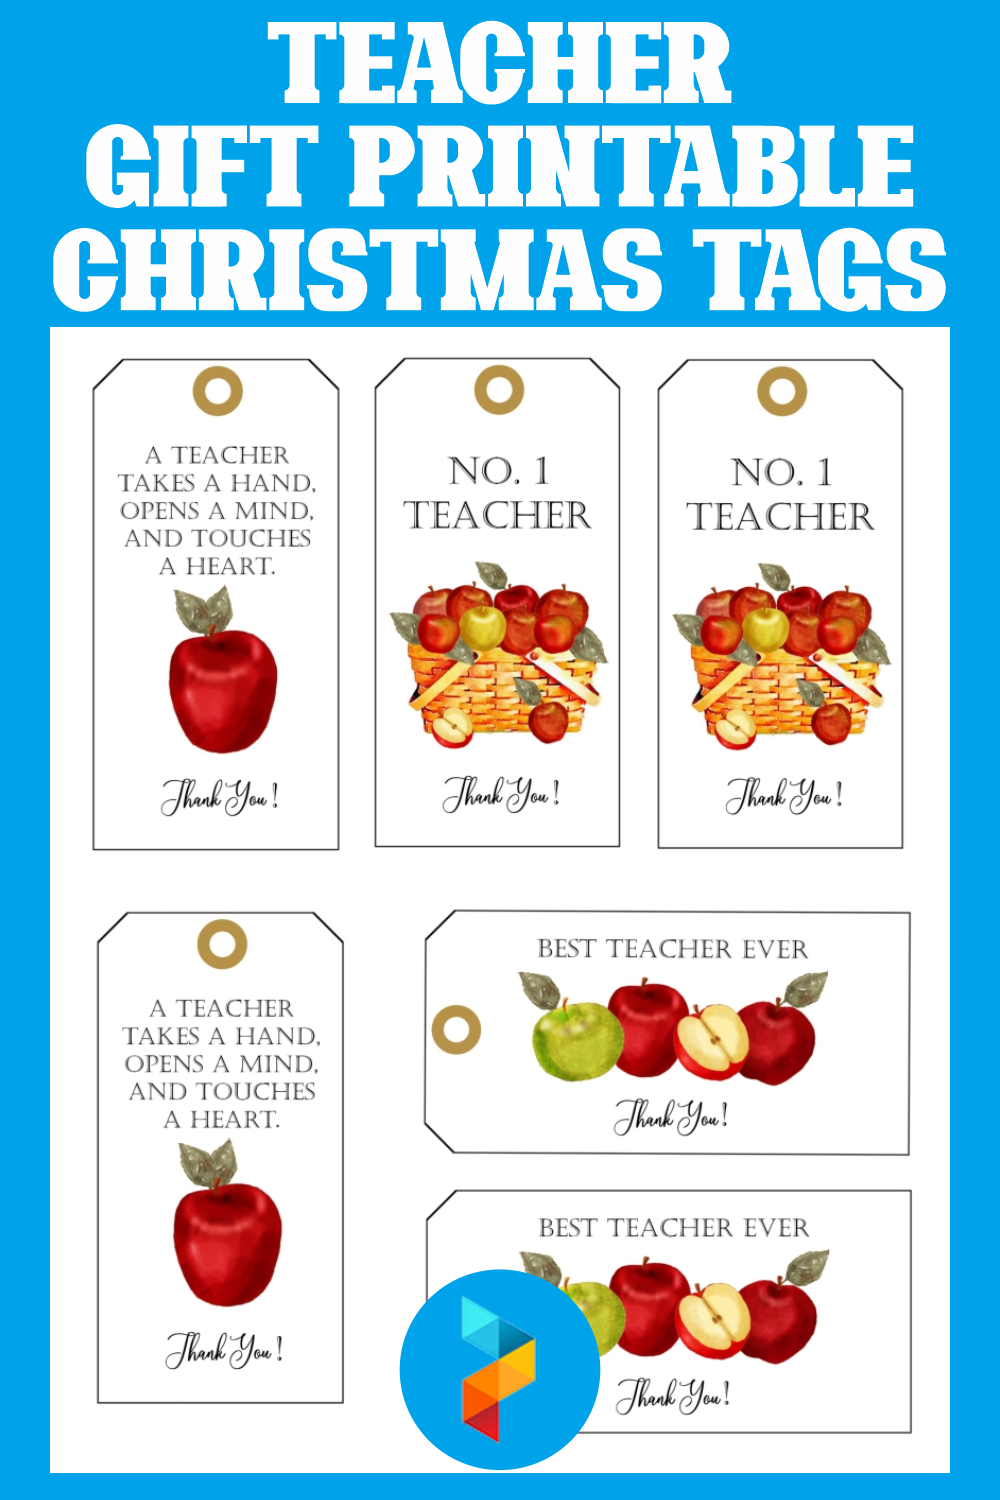 6 Best Teacher Gift Free Printable Christmas Tags PDF For Free At Printablee